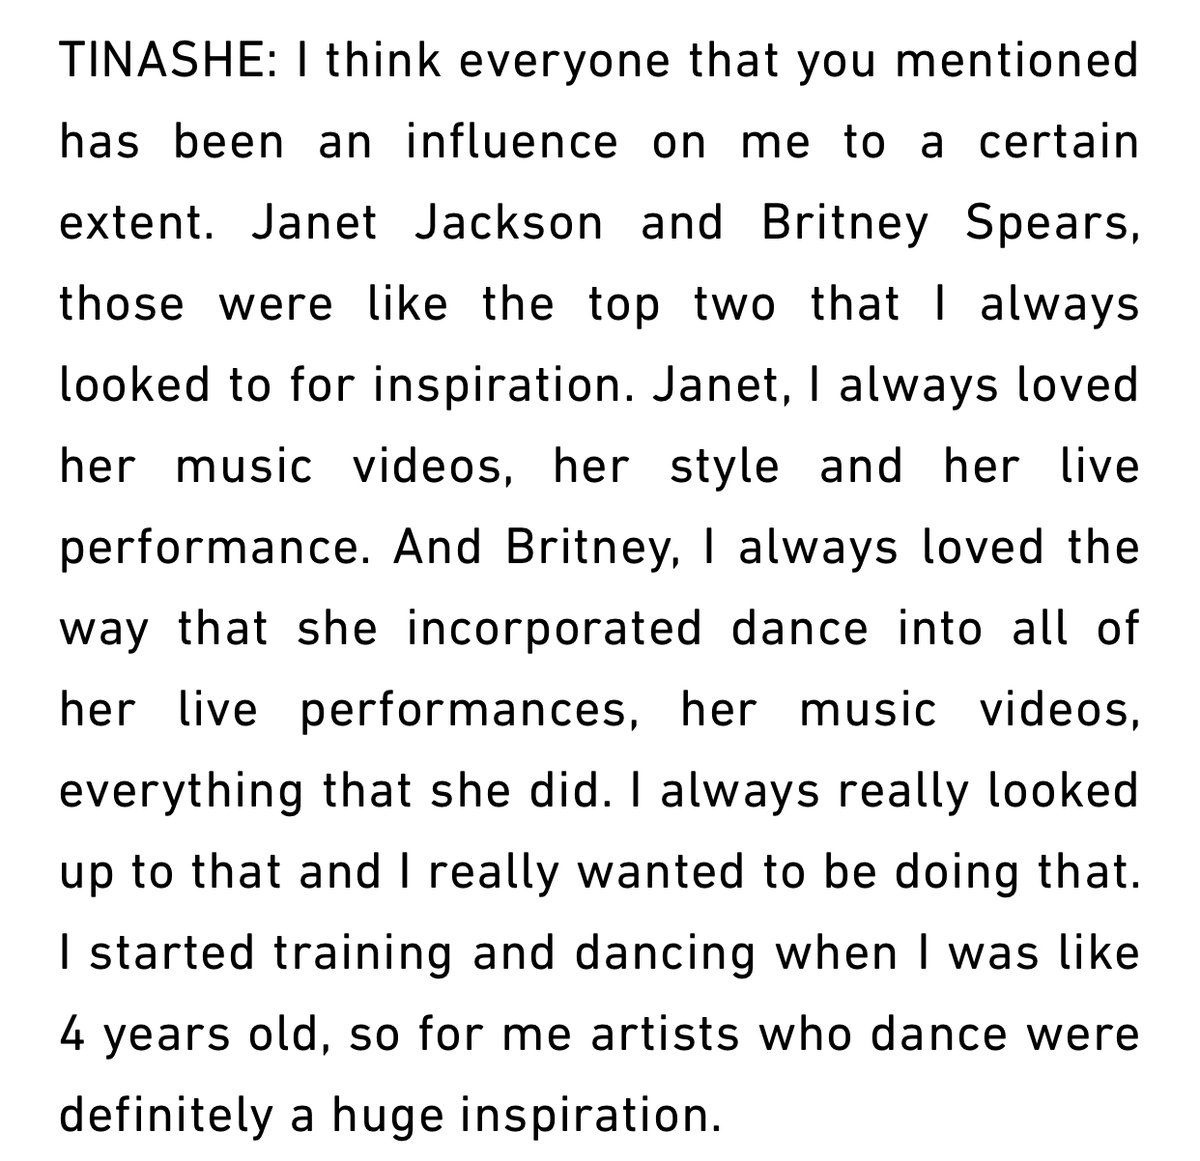 Tinashe has looked up to Britney since she was a little girl and continues to rep her on social media. She sampled "Blur" in her song "Can't Say No", which was one of her very first releases.